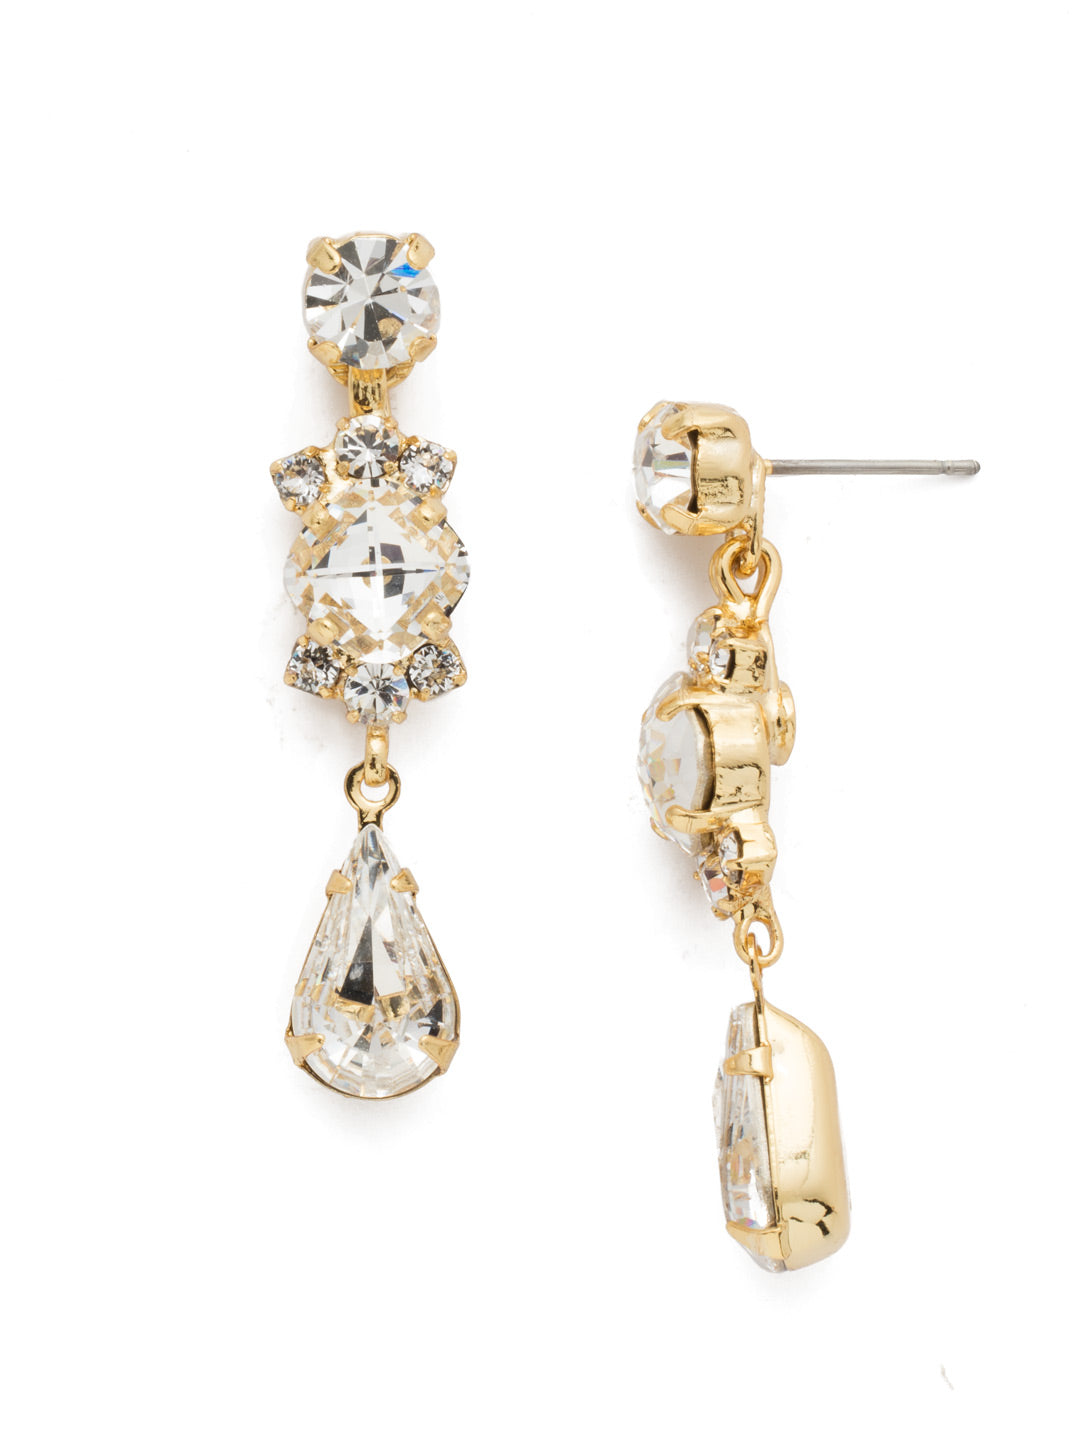 Saffron Dangle Earrings - EDS1BGCRY - This demure earring boasts round, oval, teardrop and cushion cut crystals accented by a decorative chain. From Sorrelli's Crystal collection in our Bright Gold-tone finish.